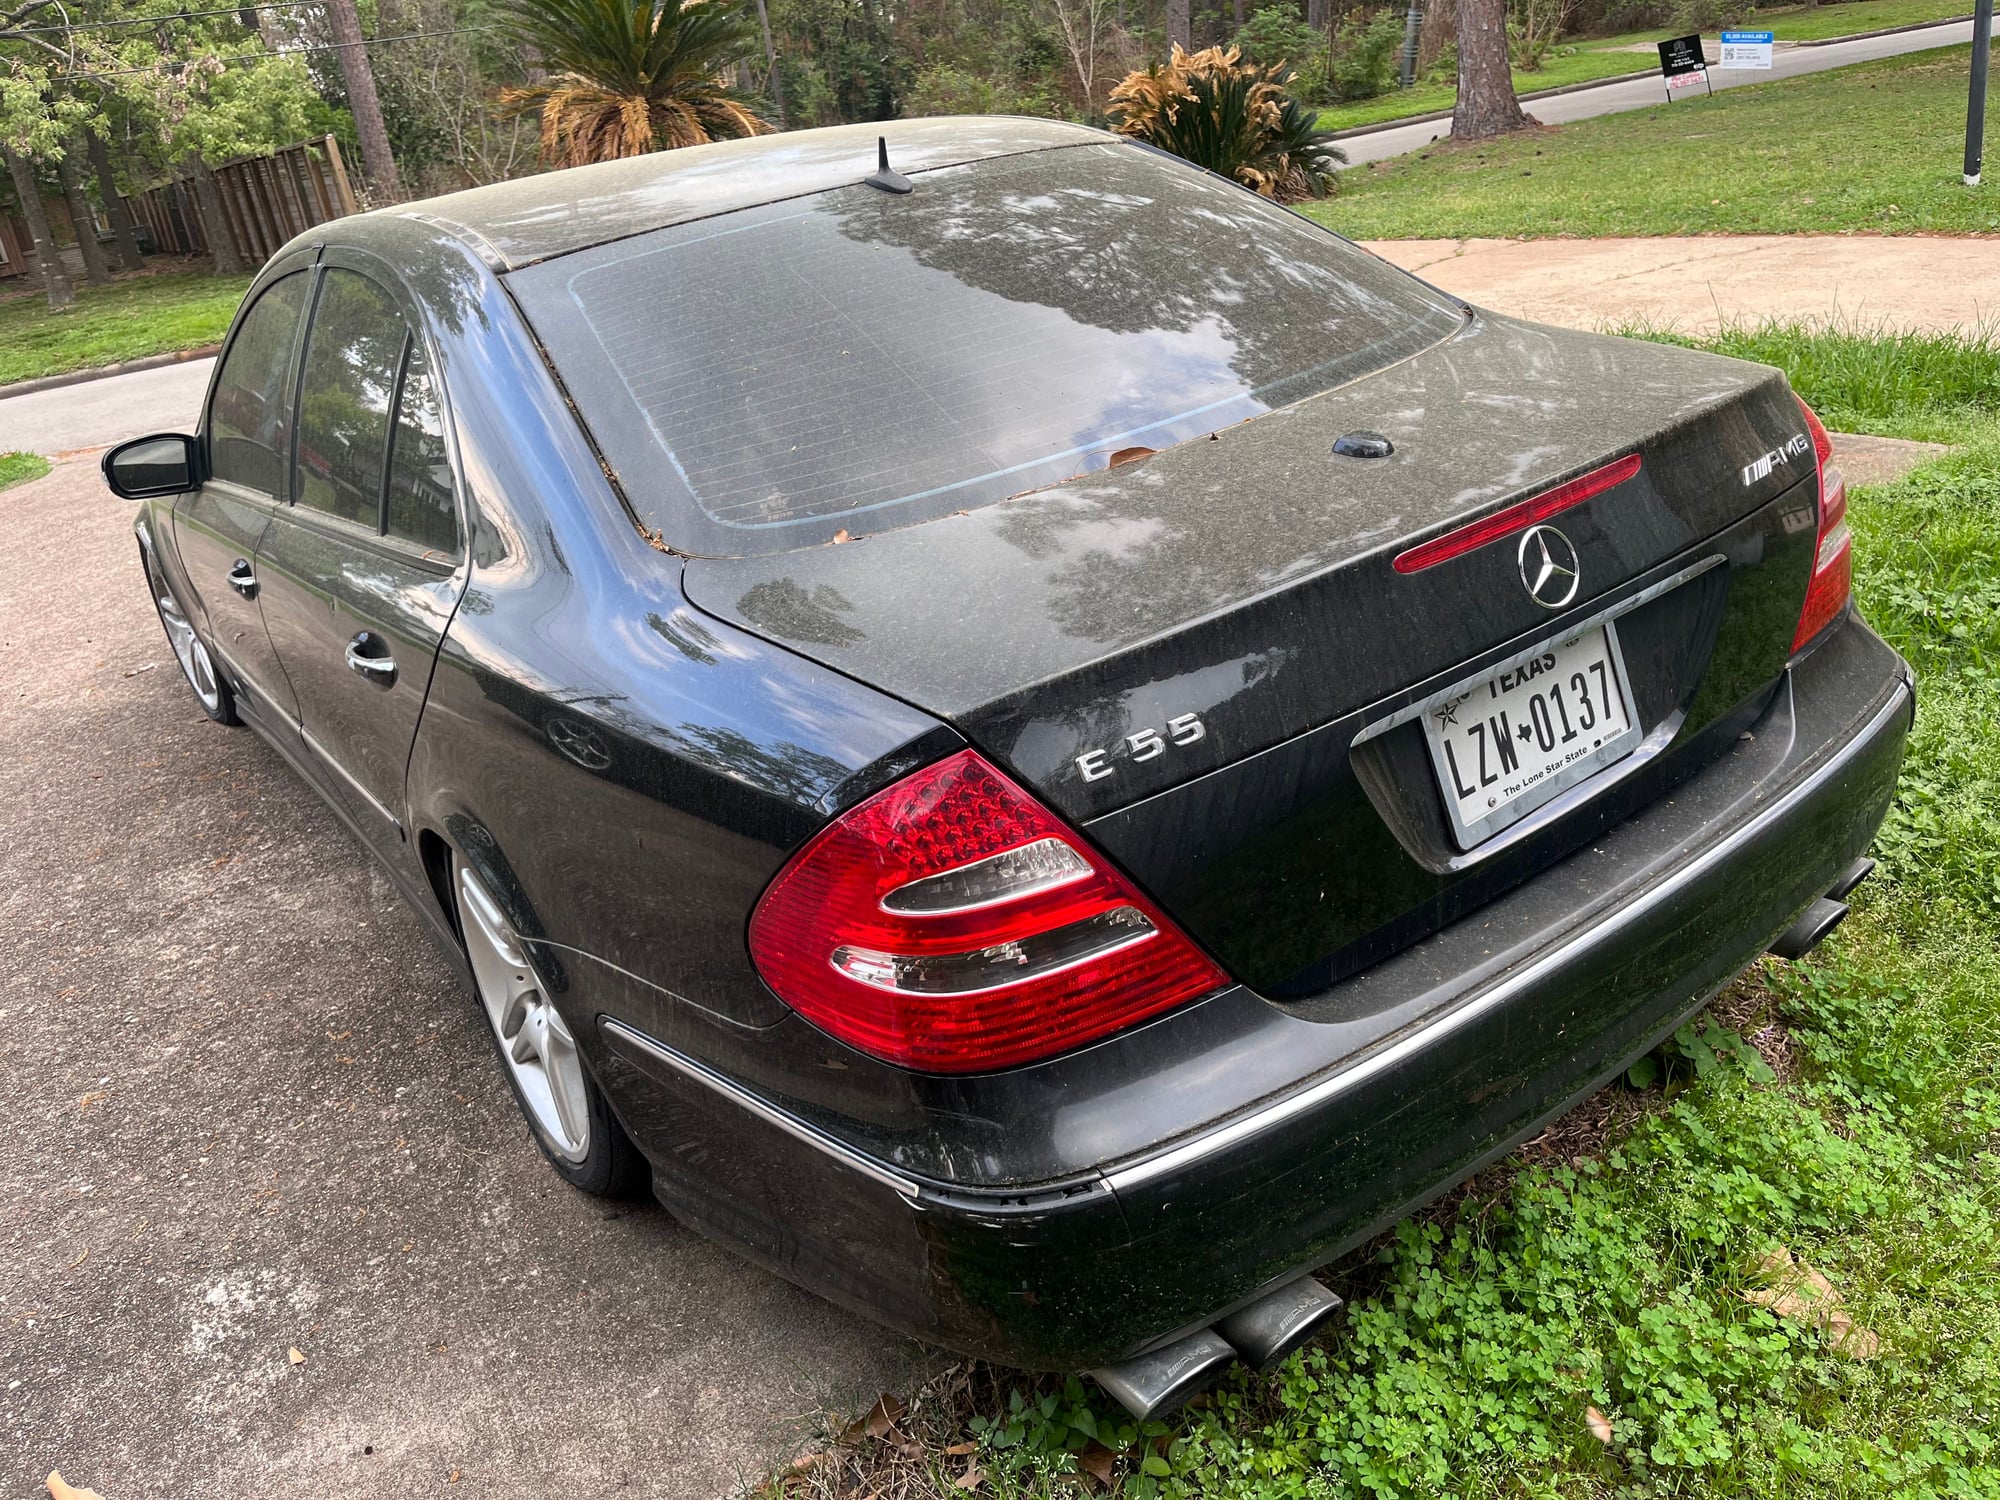 Engine - Complete - M113k 90k Miles Free Car Comes With It - Used - 2003 to 2011 Mercedes-Benz E55 AMG - All Years Mercedes-Benz S55 AMG - All Years Mercedes-Benz G55 AMG - All Years Mercedes-Benz SL55 AMG - Houston, TX 77001, United States